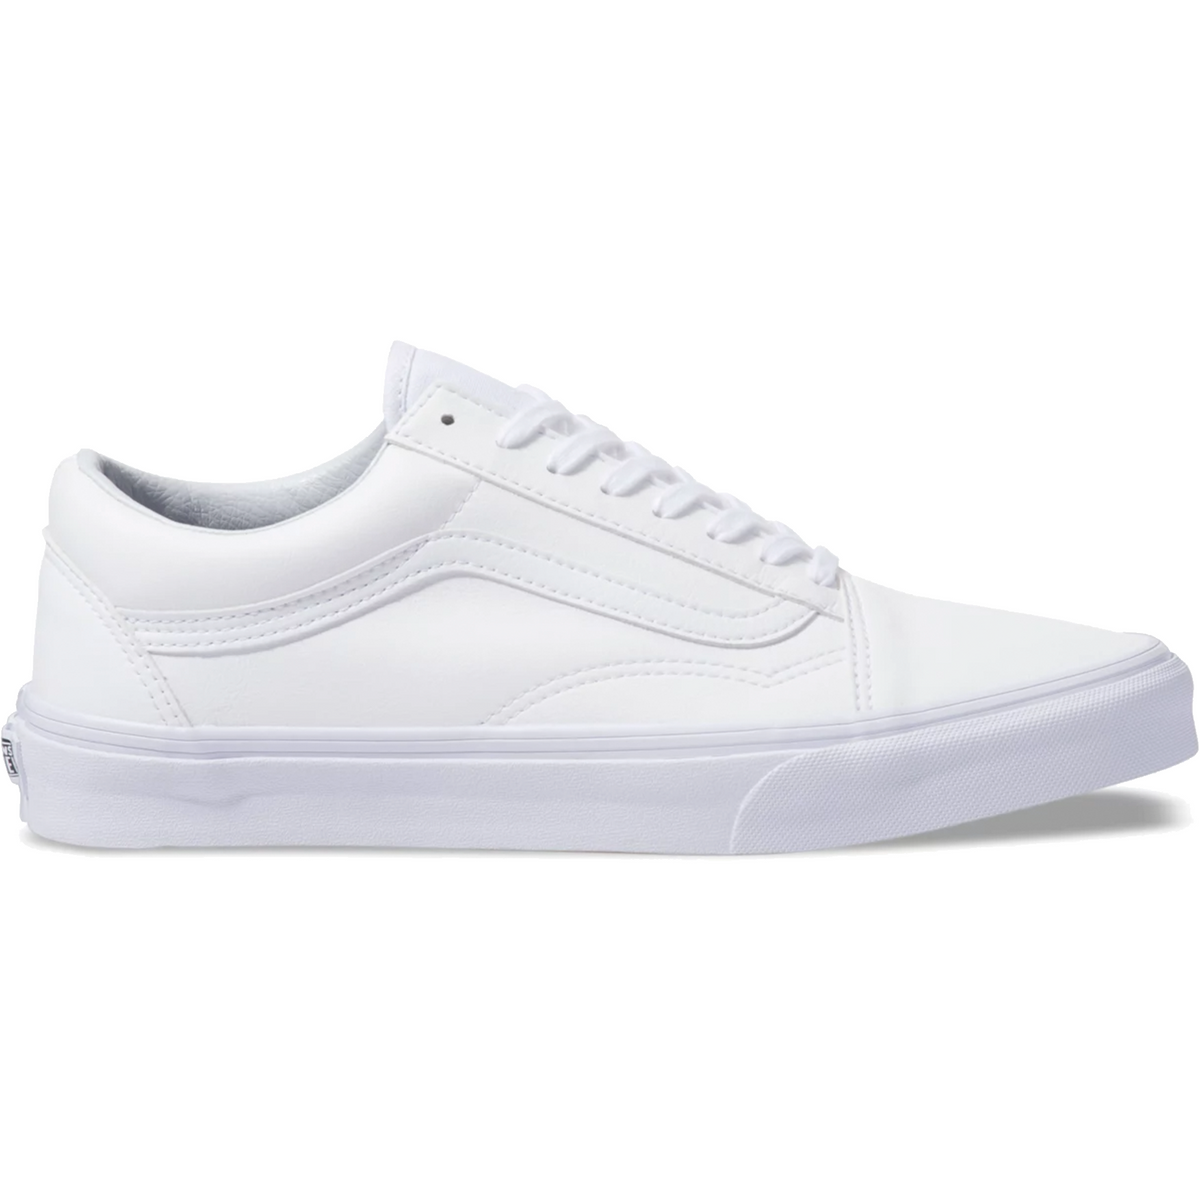 Vans Unisex Old Skool Shoes All White — Just For Sports